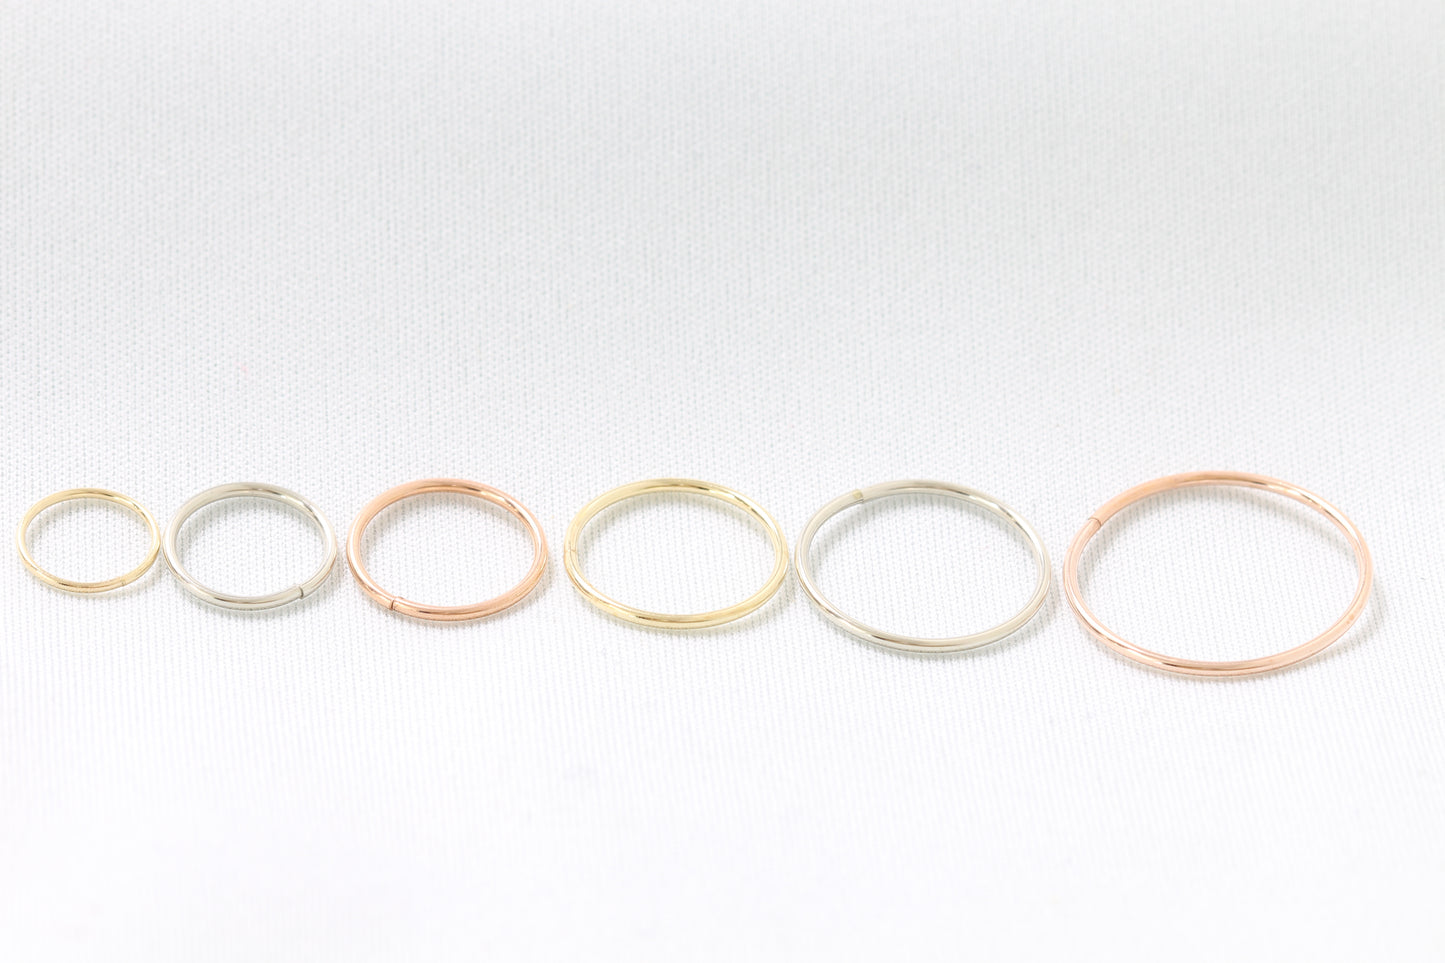 10k hoop earrings sleepers white, yellow, and rose gold.